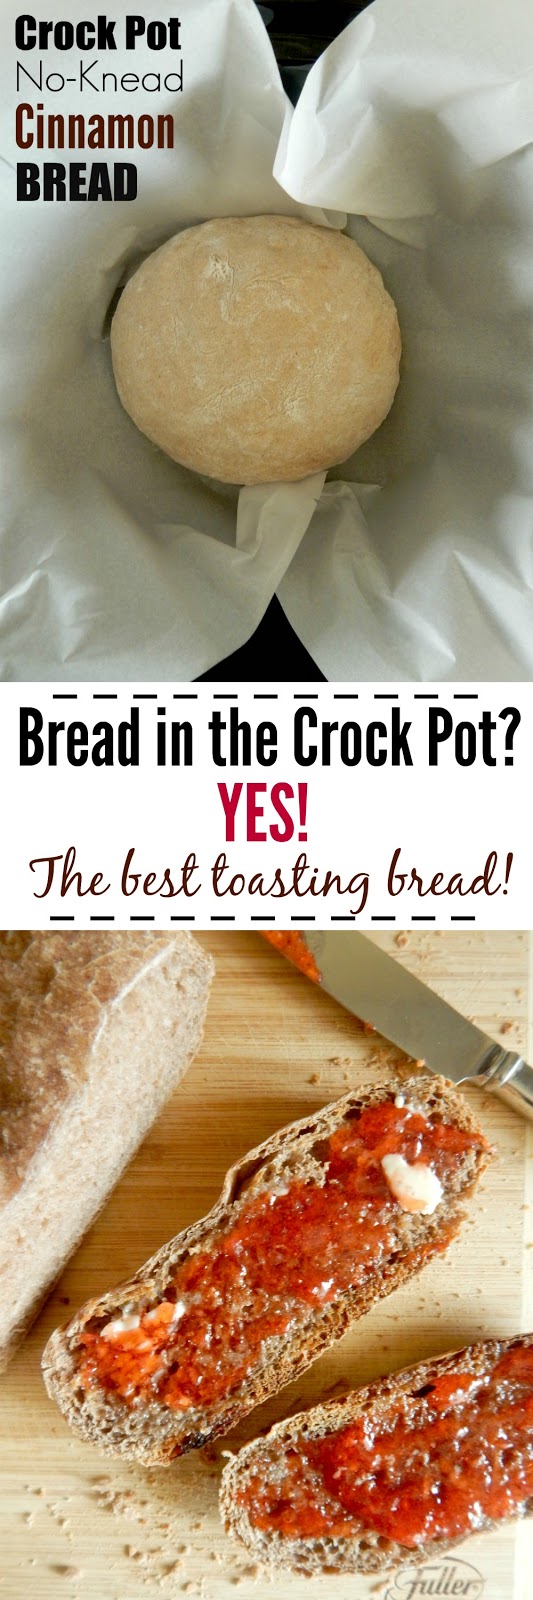 Crock Pot No-Knead Cinnamon Bread...yes, you can make bread in the slow cooker!  This bread is perfect for toast in the morning! (sweetandsavoryfood.com)